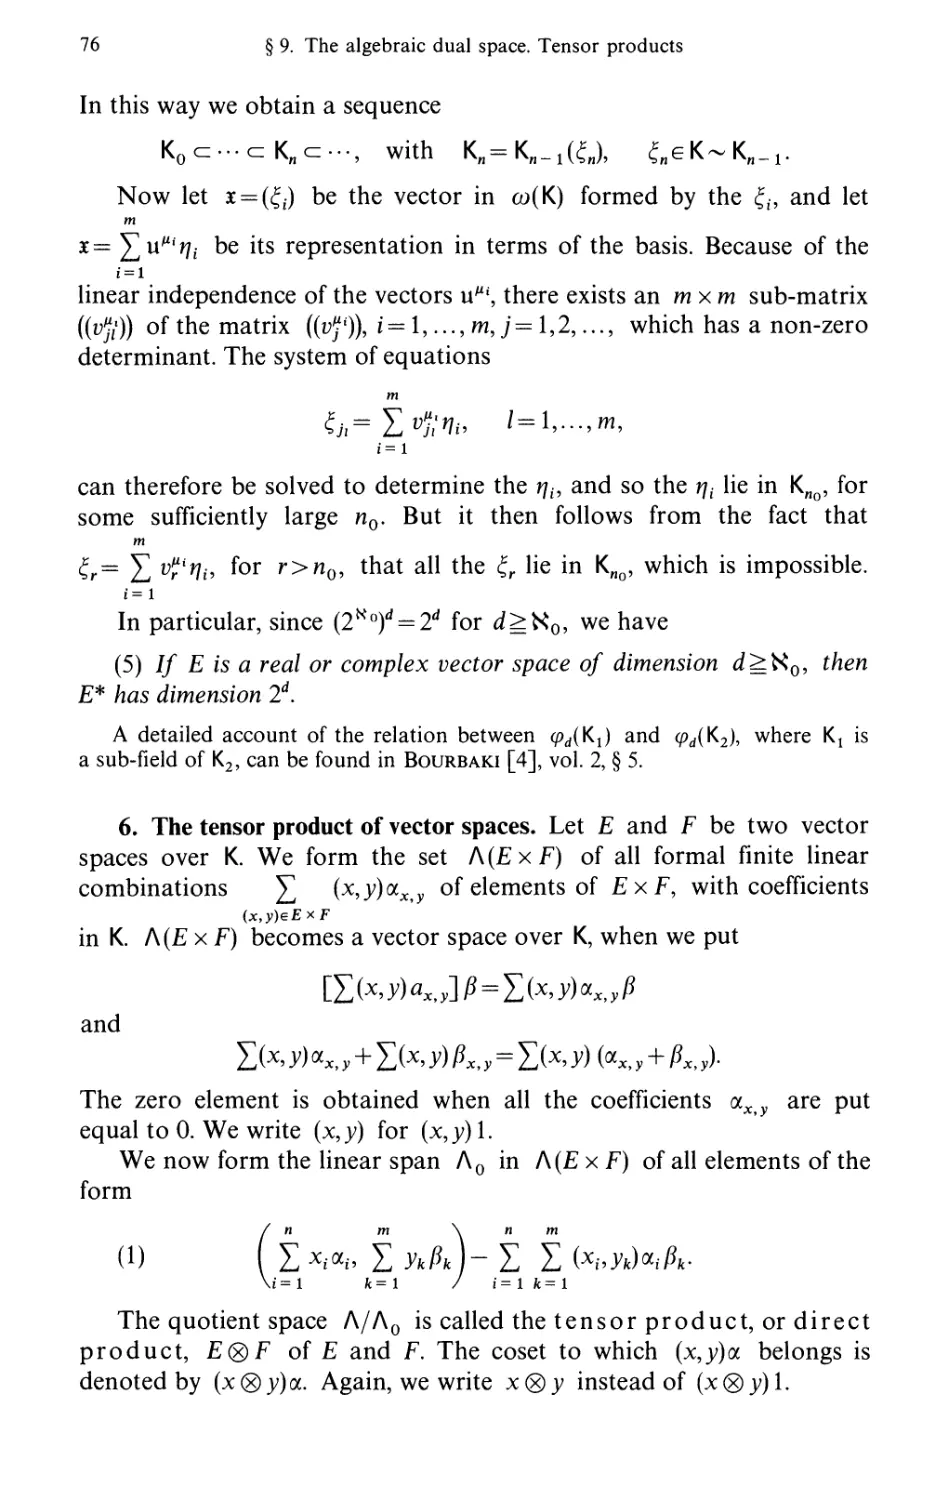 6. The tensor product of vector spaces